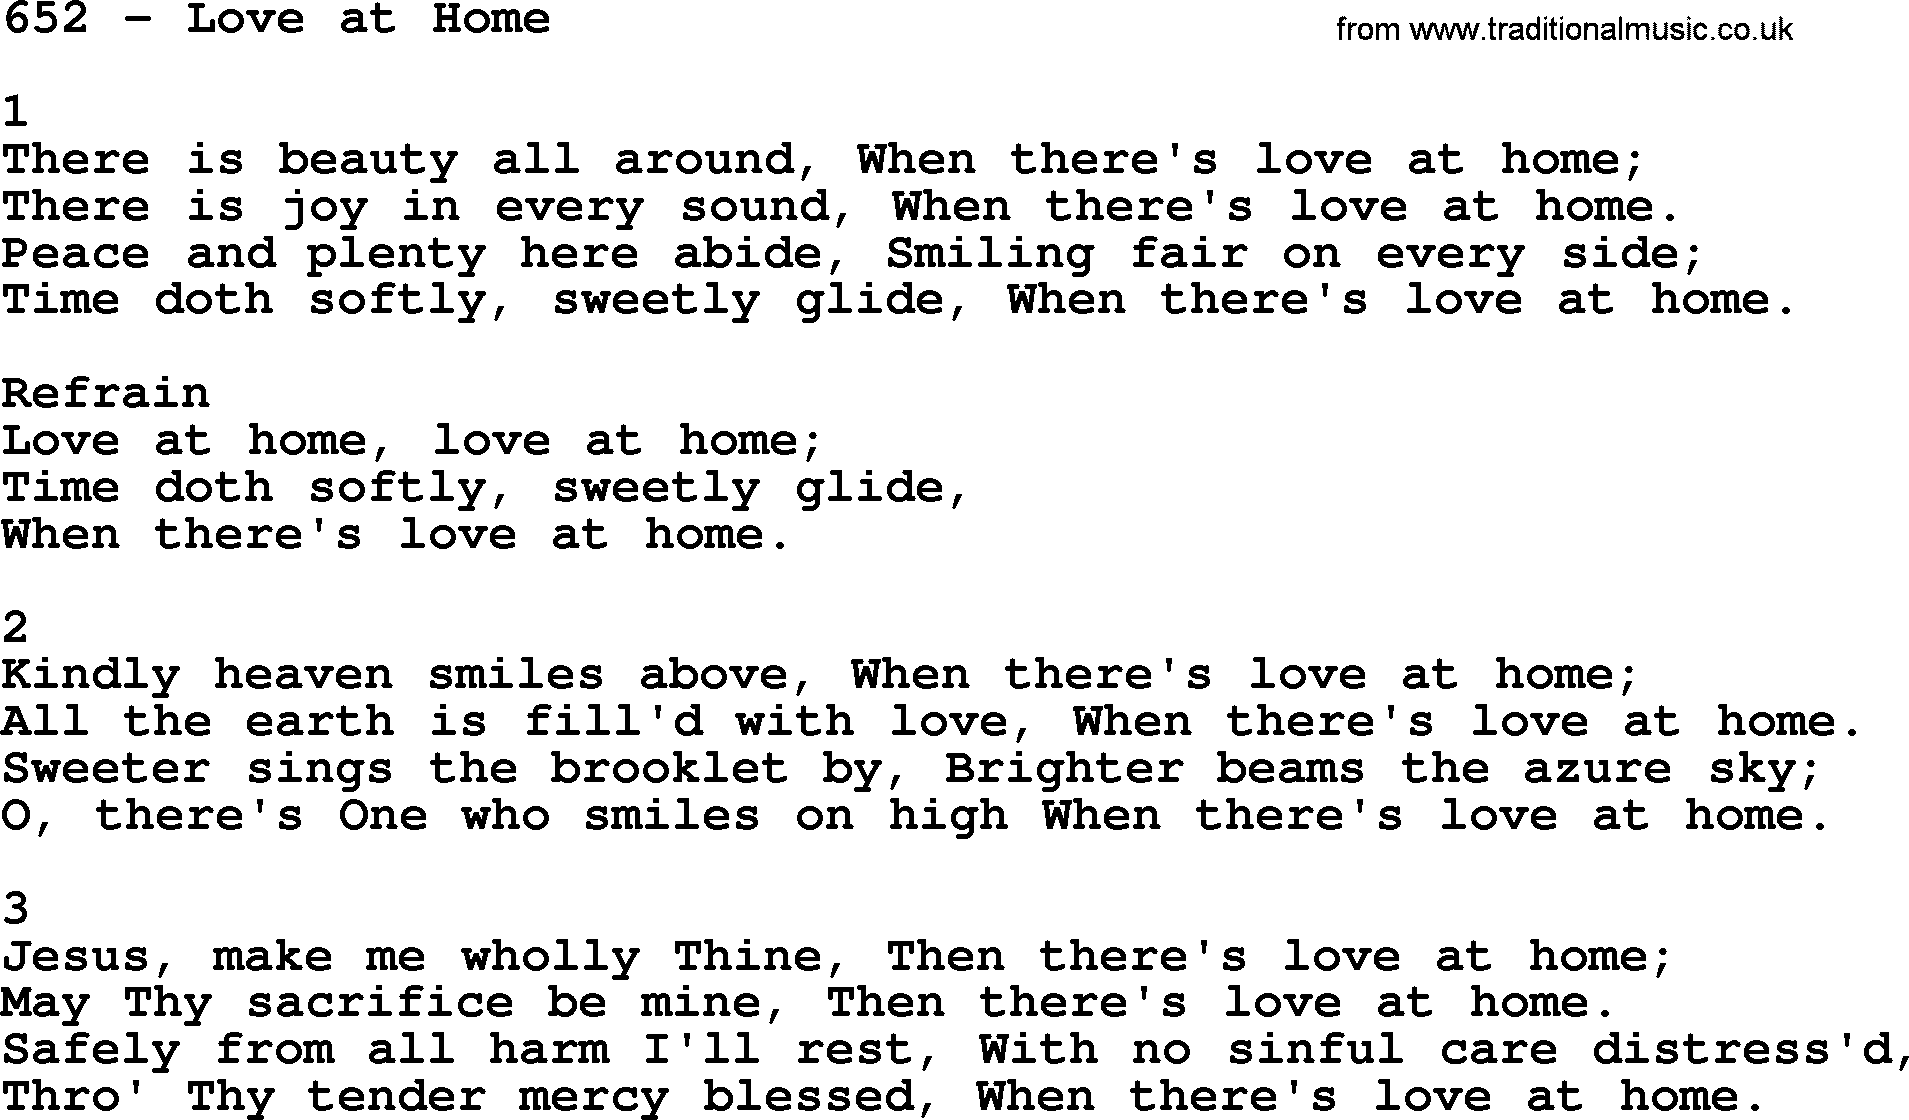 Complete Adventis Hymnal, title: 652-Love At Home, with lyrics, midi, mp3, powerpoints(PPT) and PDF,